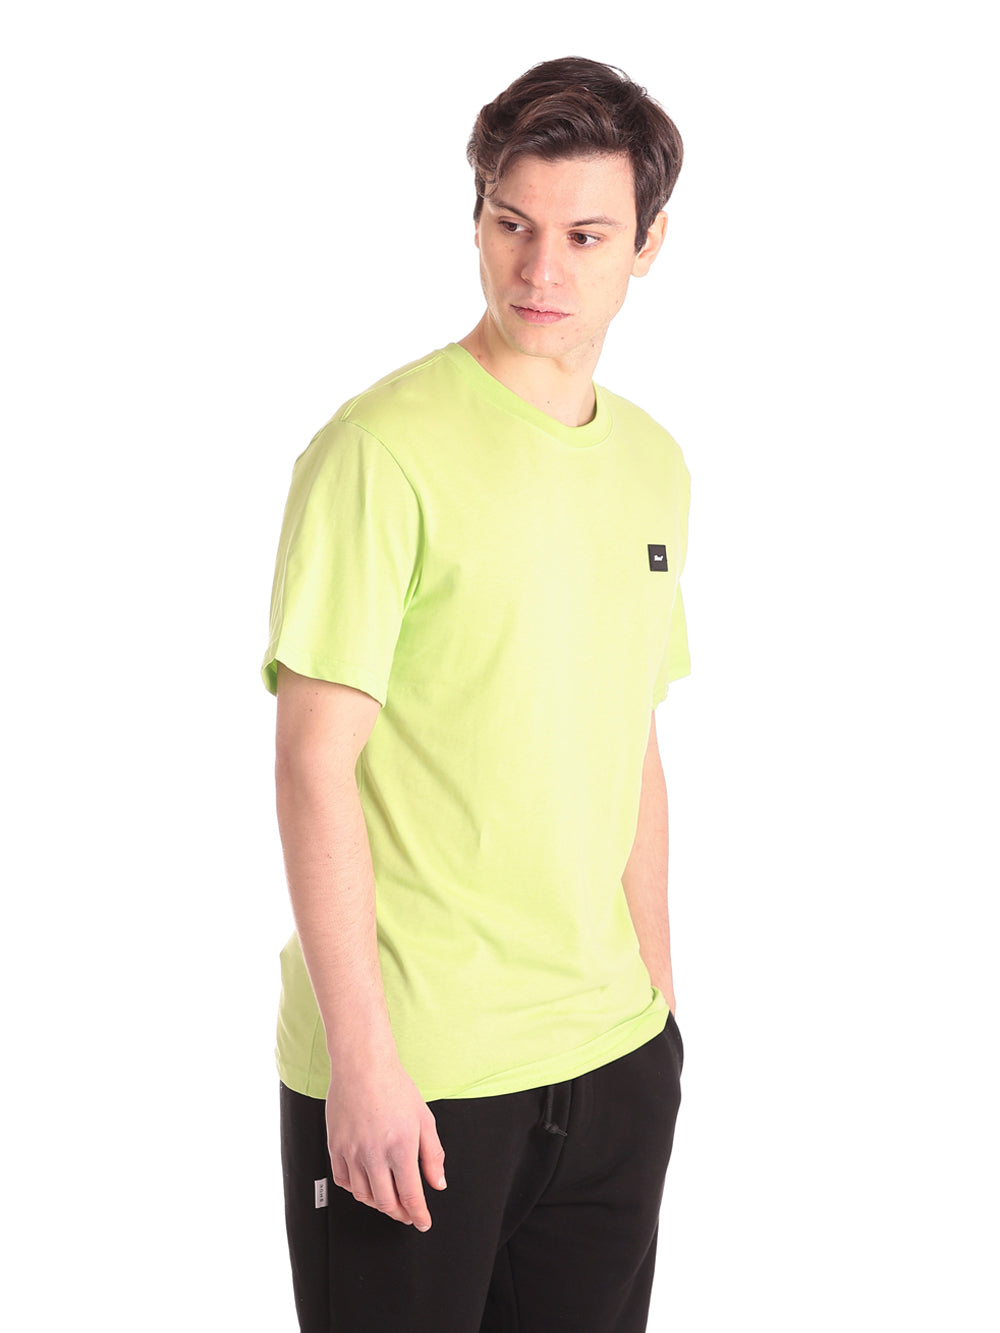 T-Shirt S23ted2022 Lime Green